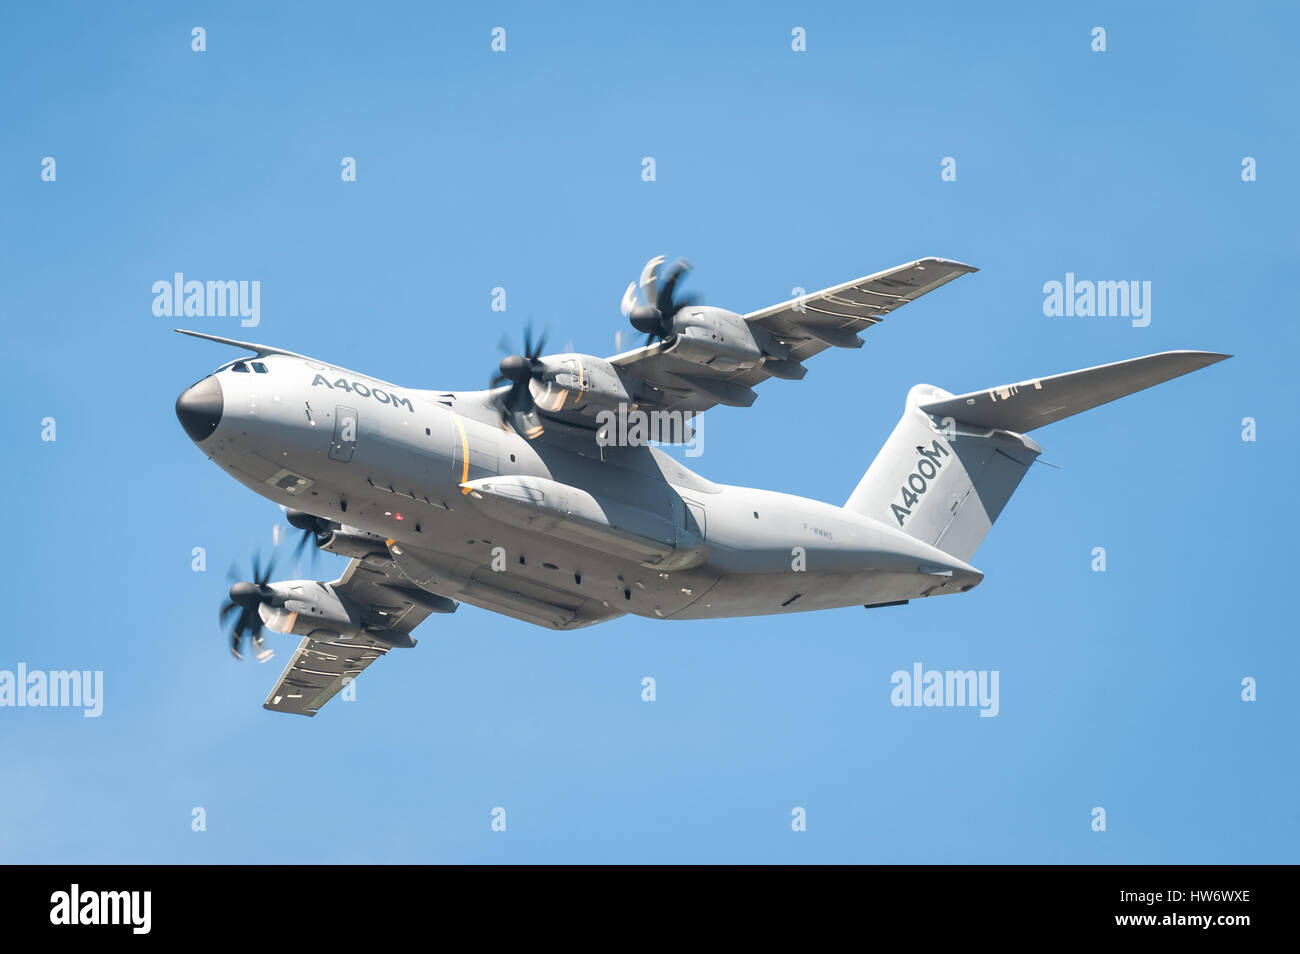 Closeup of an Airbus A400M military and emergency aid transporter aircraft in low-level flight over Farnborough, UK Stock Photo